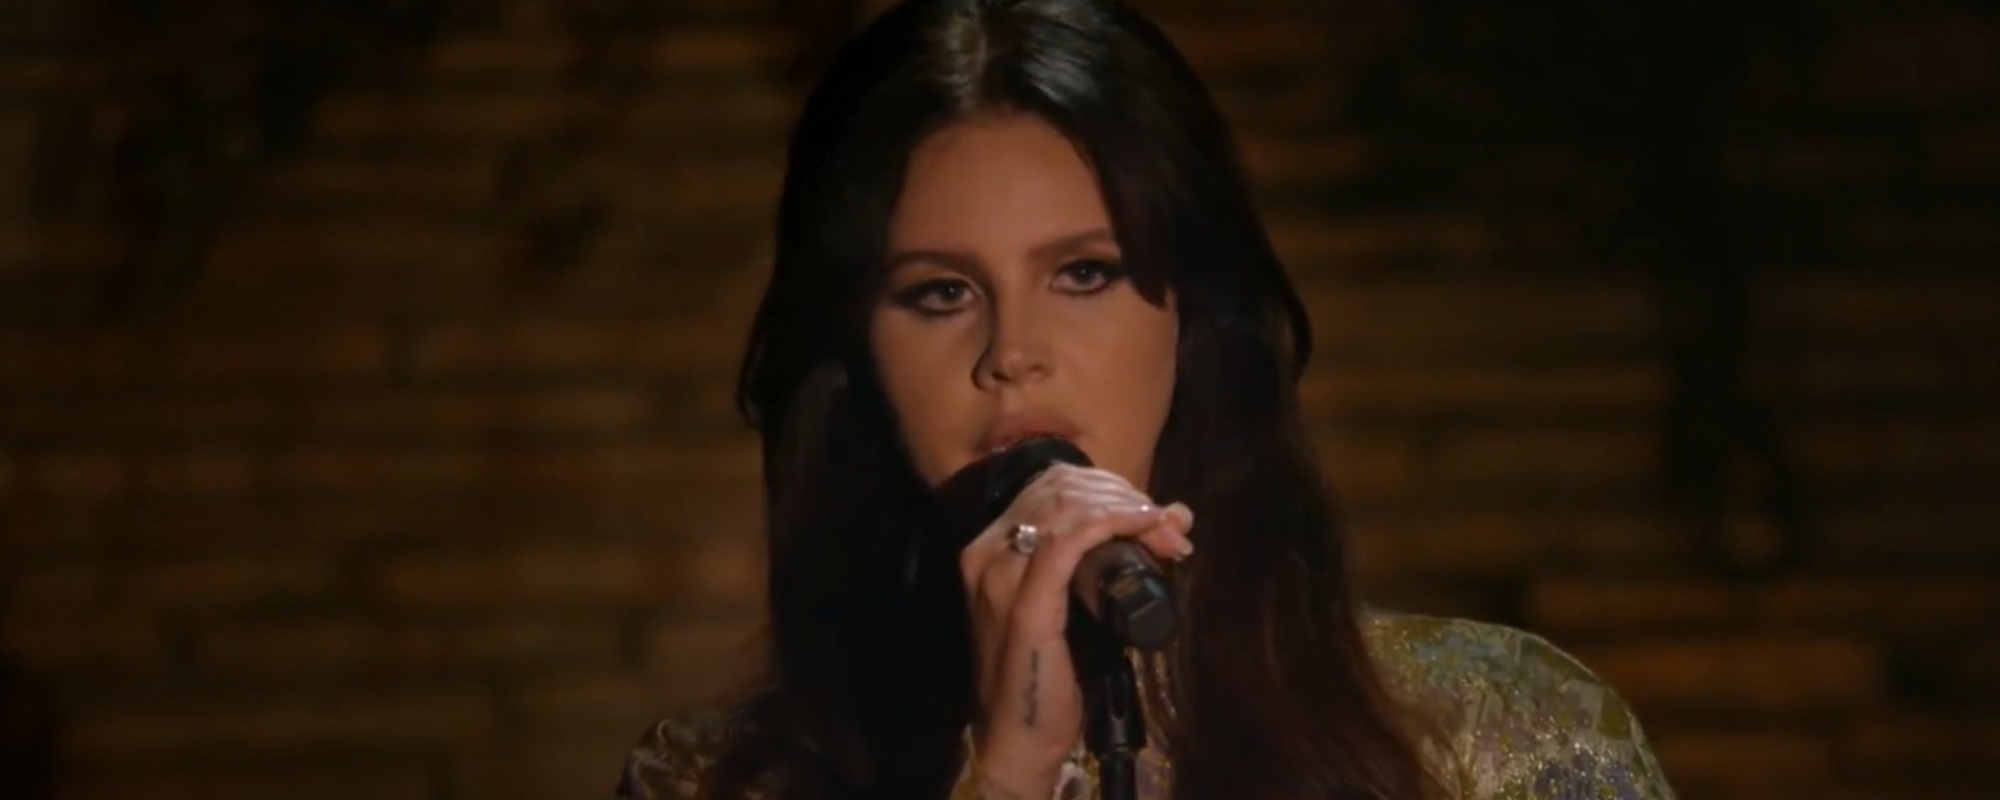 Lana Del Rey Brought Fans to Tears with Her Emotional ‘Christmas at Graceland’ Performance